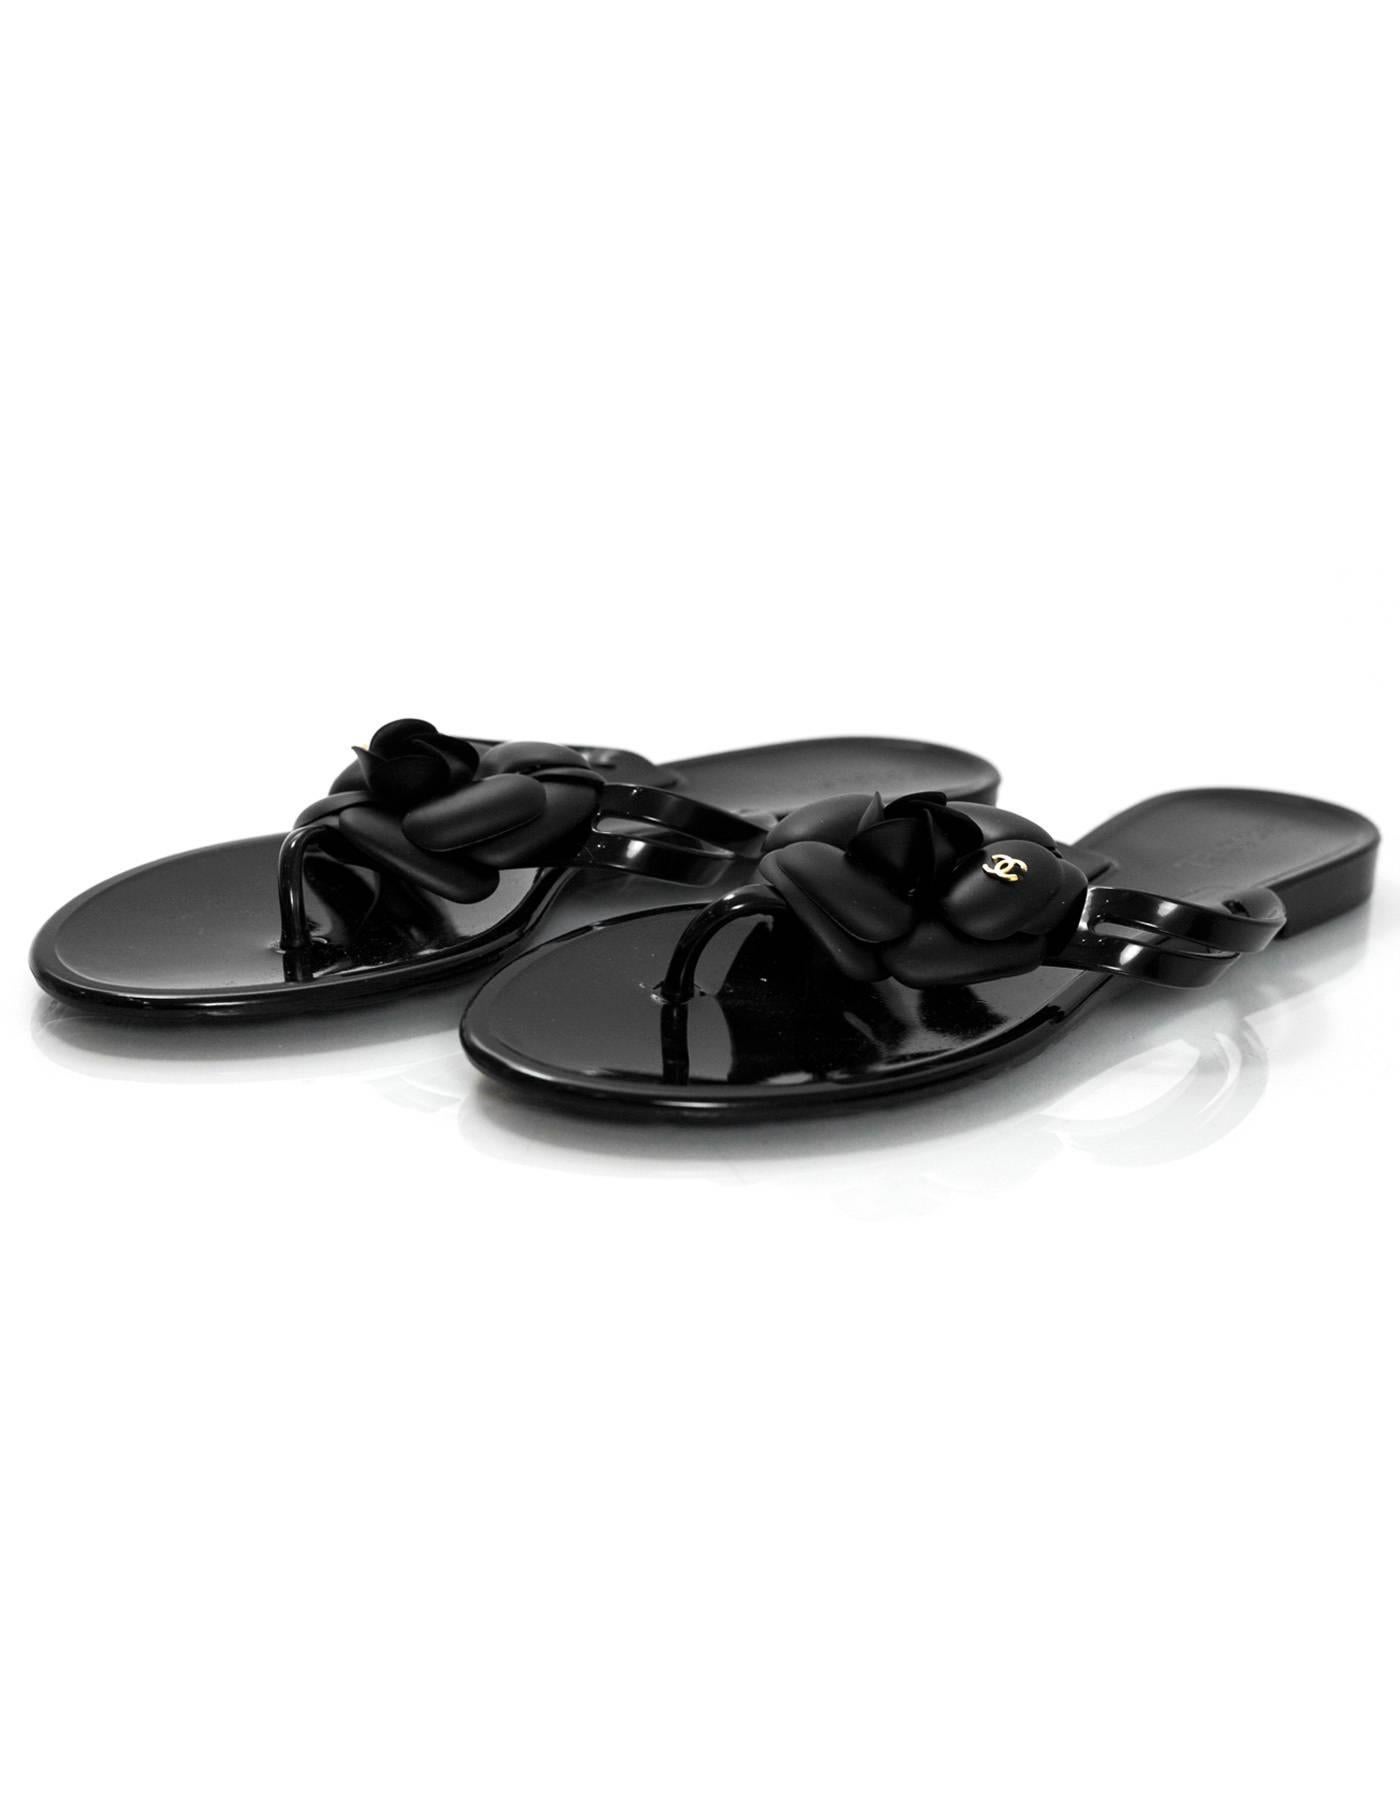 Chanel Black Jelly Camellia Sandals Sz 39

Made In: Italy
Color: Black
Materials: Rubber
Closure/Opening: Slide on
Sole Stamp: CC Made in Italy 39
Overall Condition: Excellent pre-owned condition, dont appear to be worn
Included: Chanel box, dust